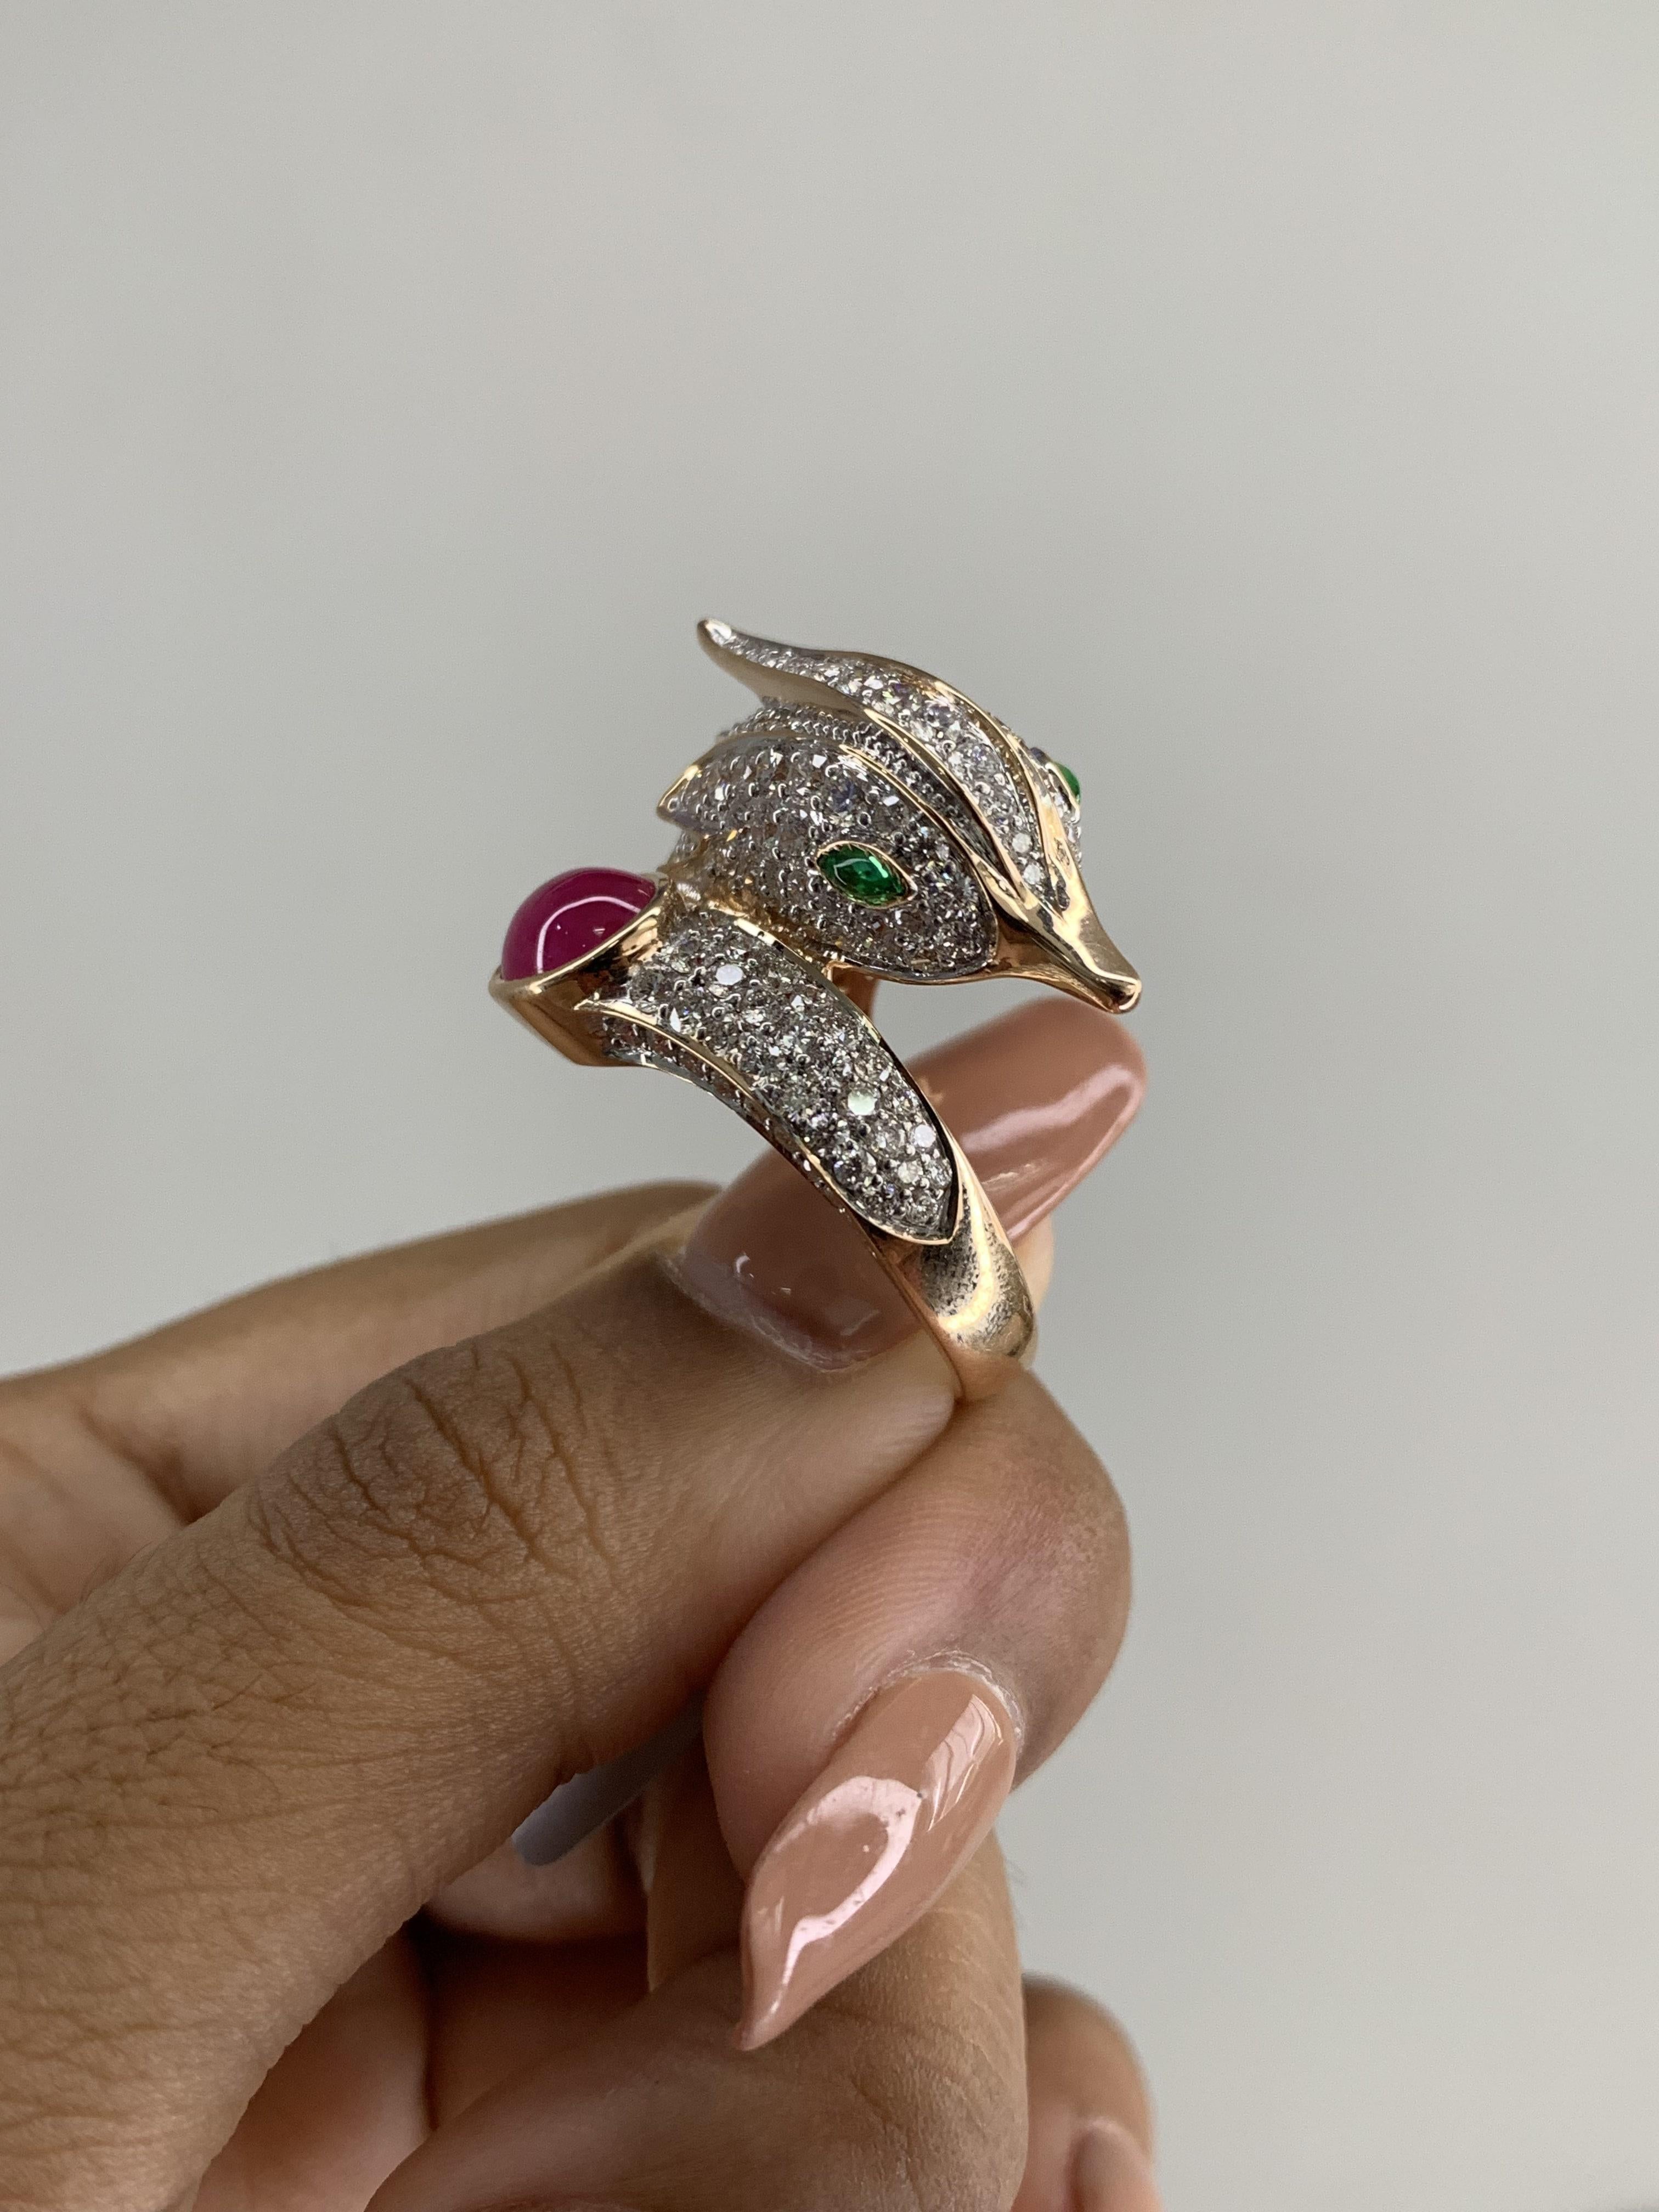 Georgian Peacock Inspired 18K Gold Statement Ring with Diamonds and 1.96 Ct Ruby Cabochon